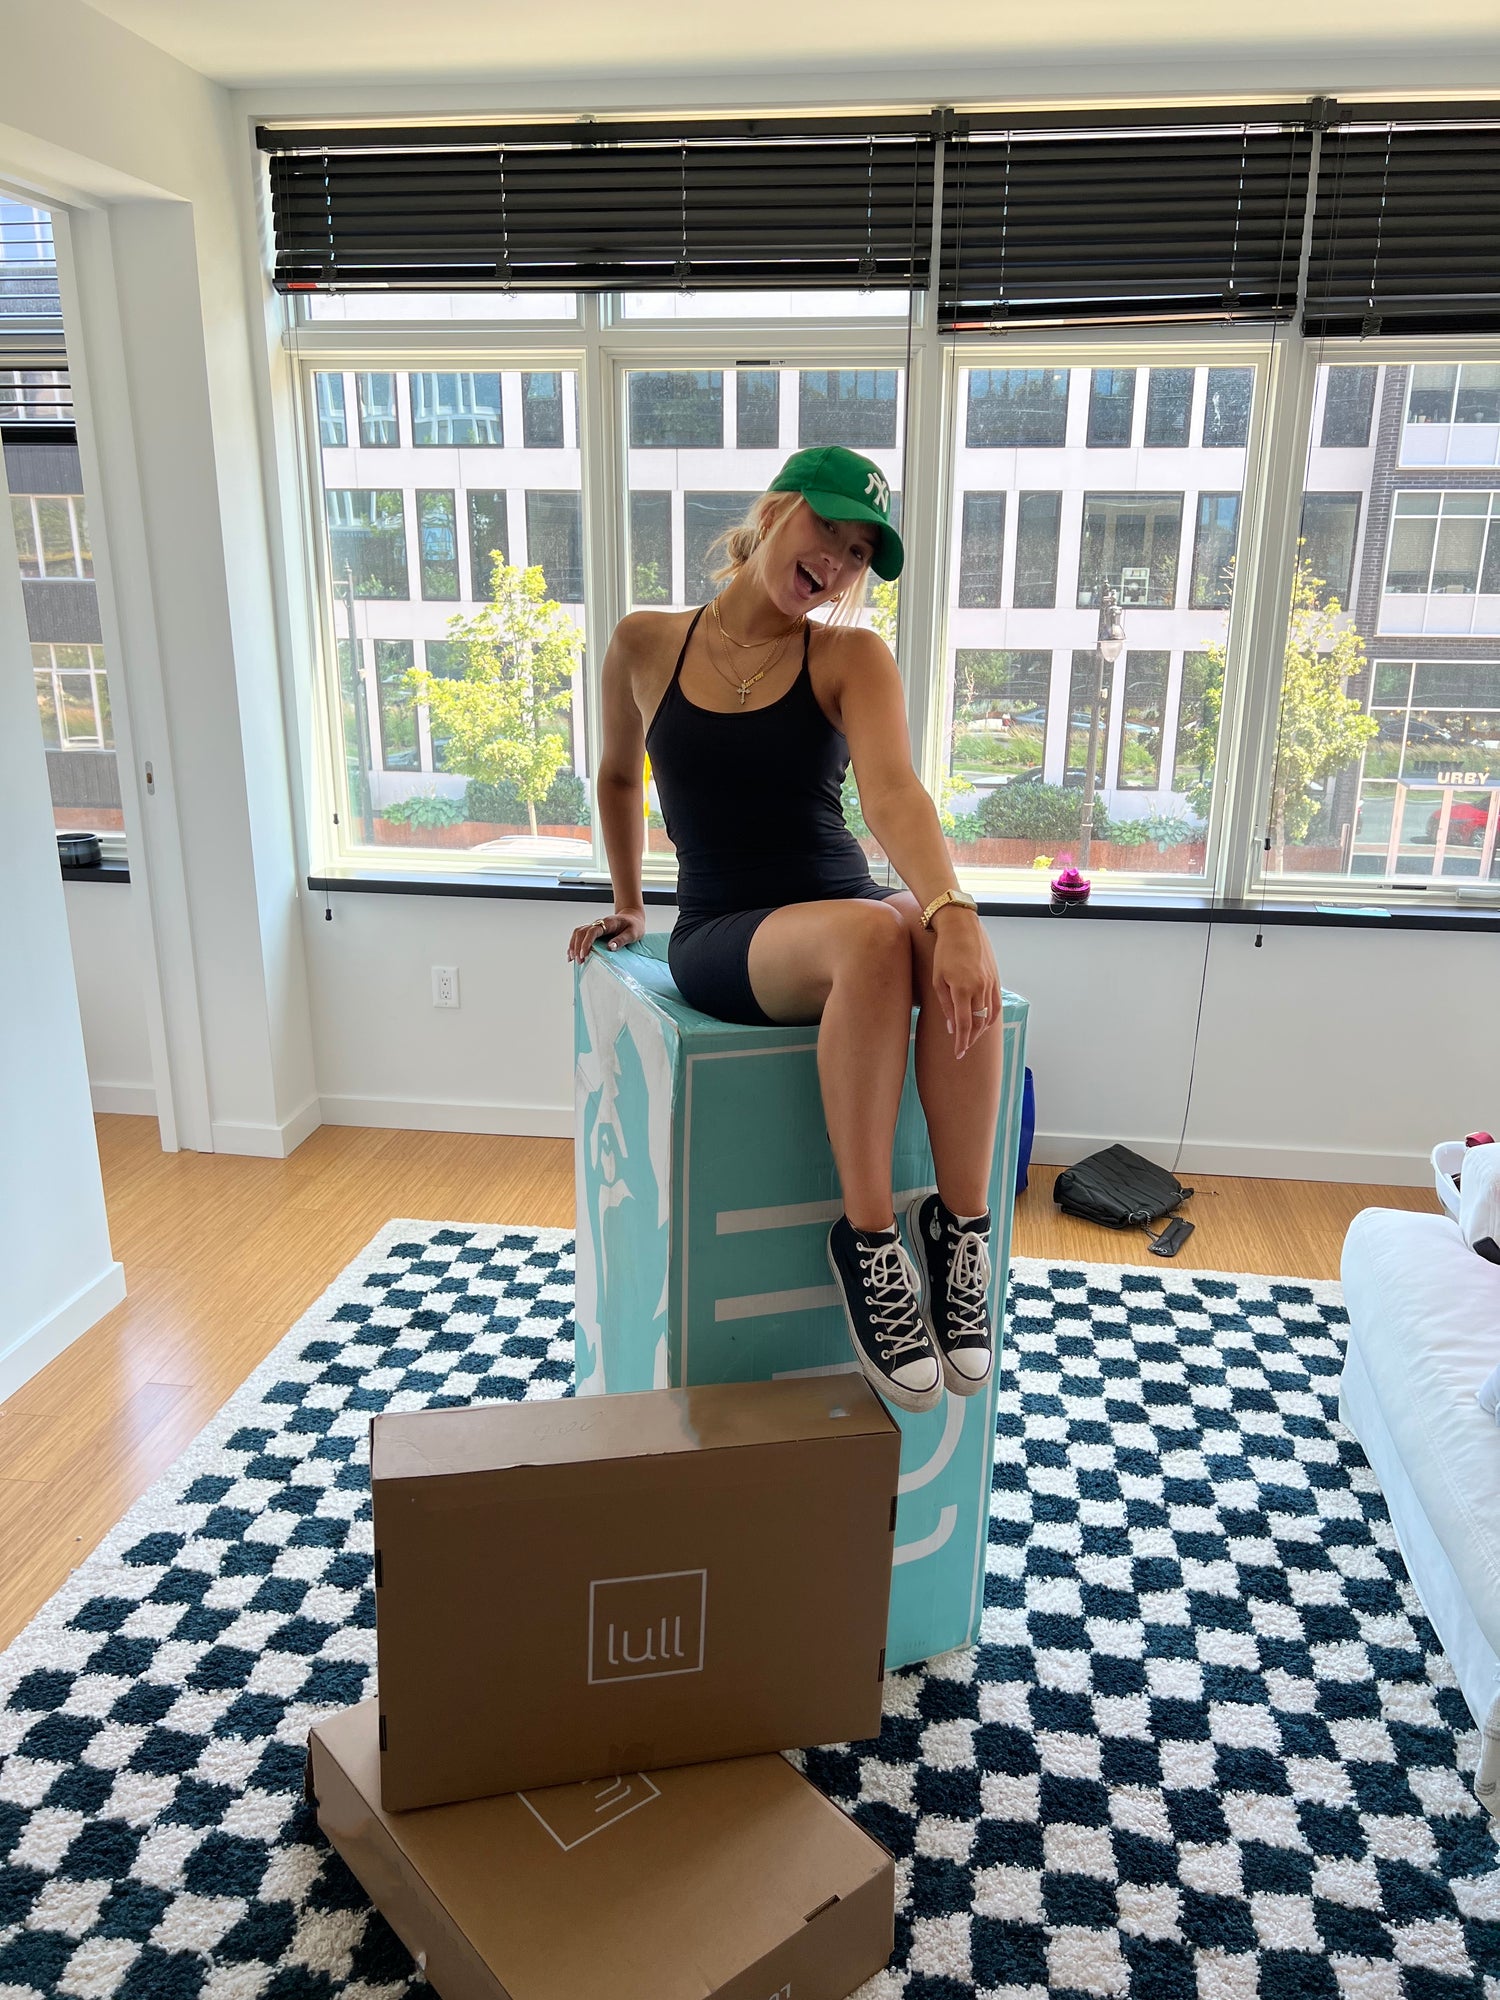 A girl sitting on top of a Lull box smiling in a sunny apartment.